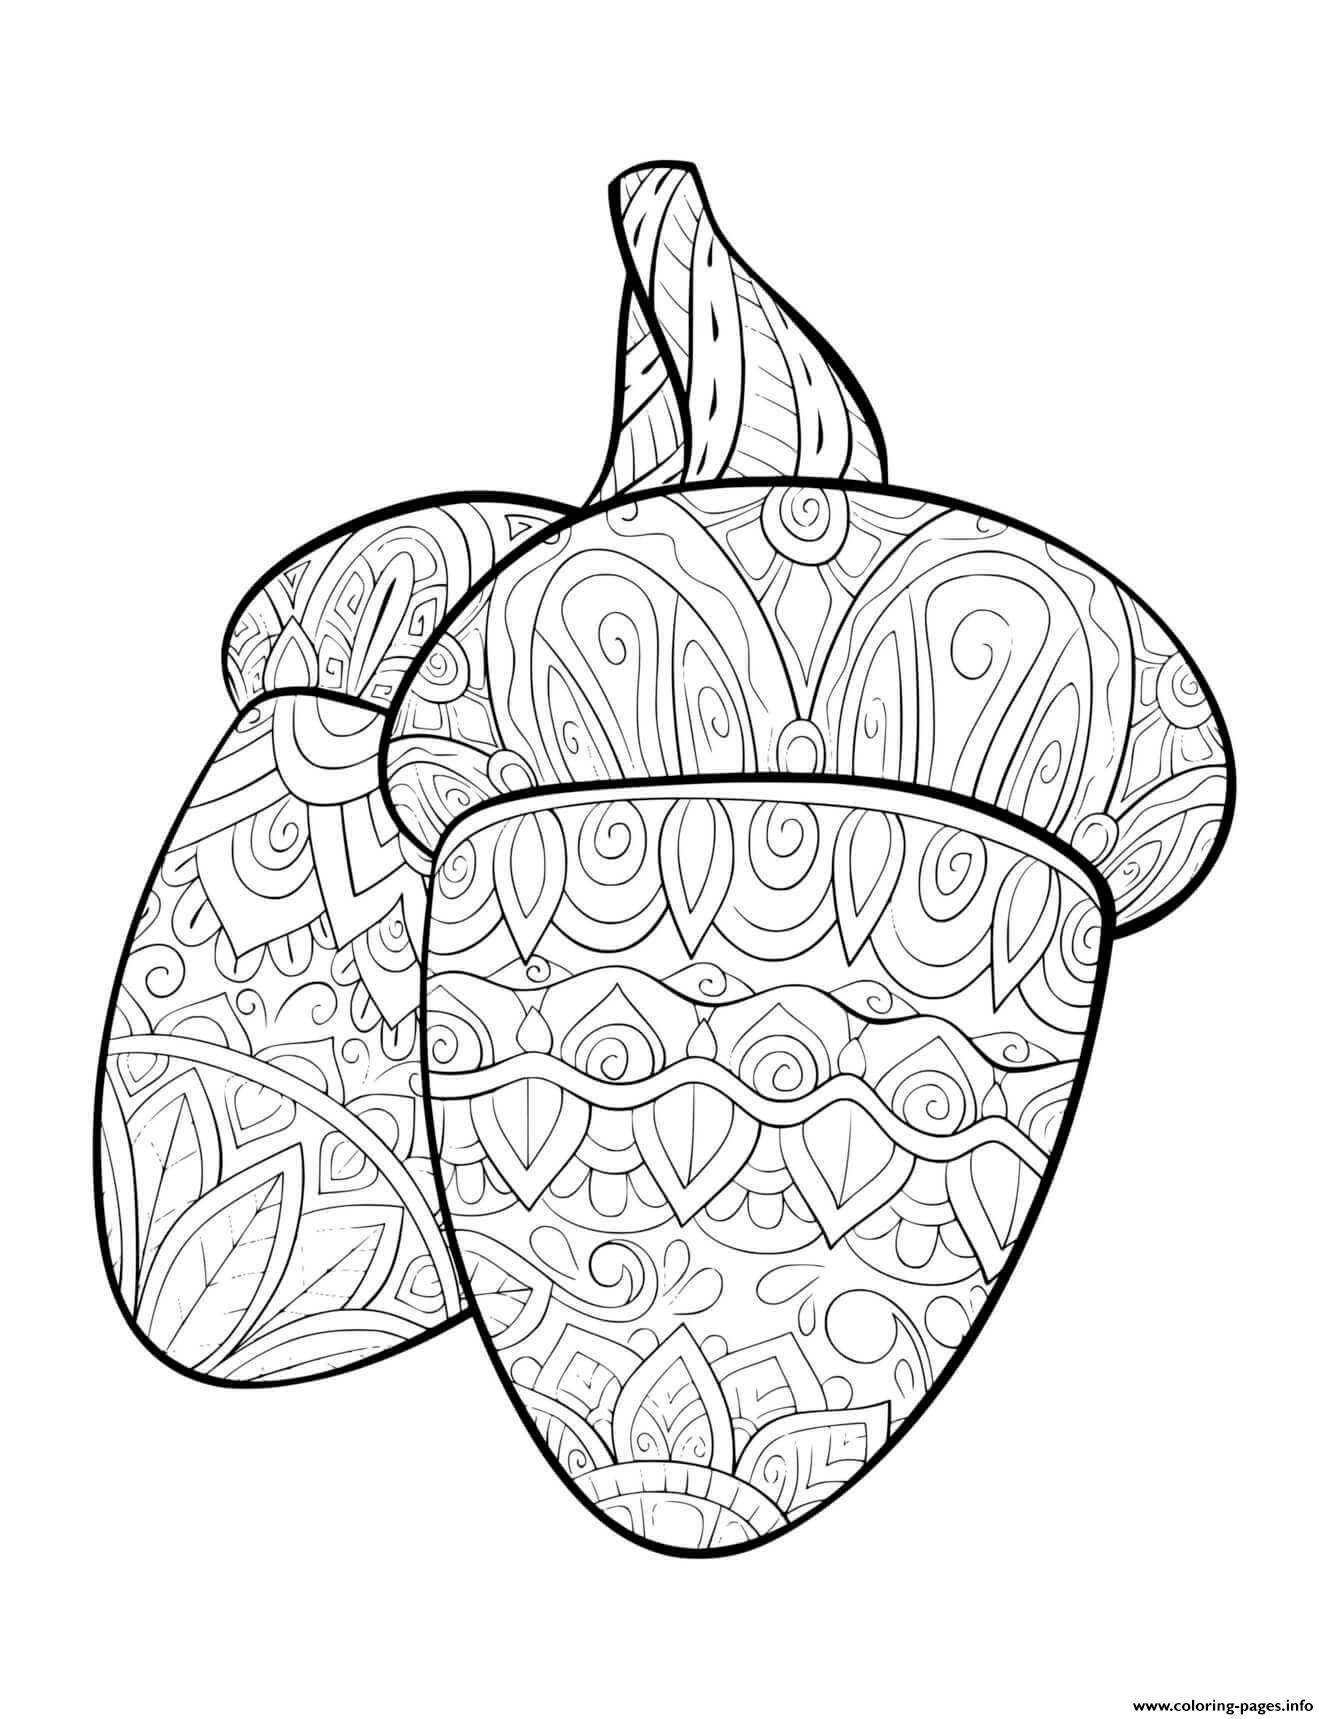 Fall Patterned Acorn For Adults Coloring Pages Printable